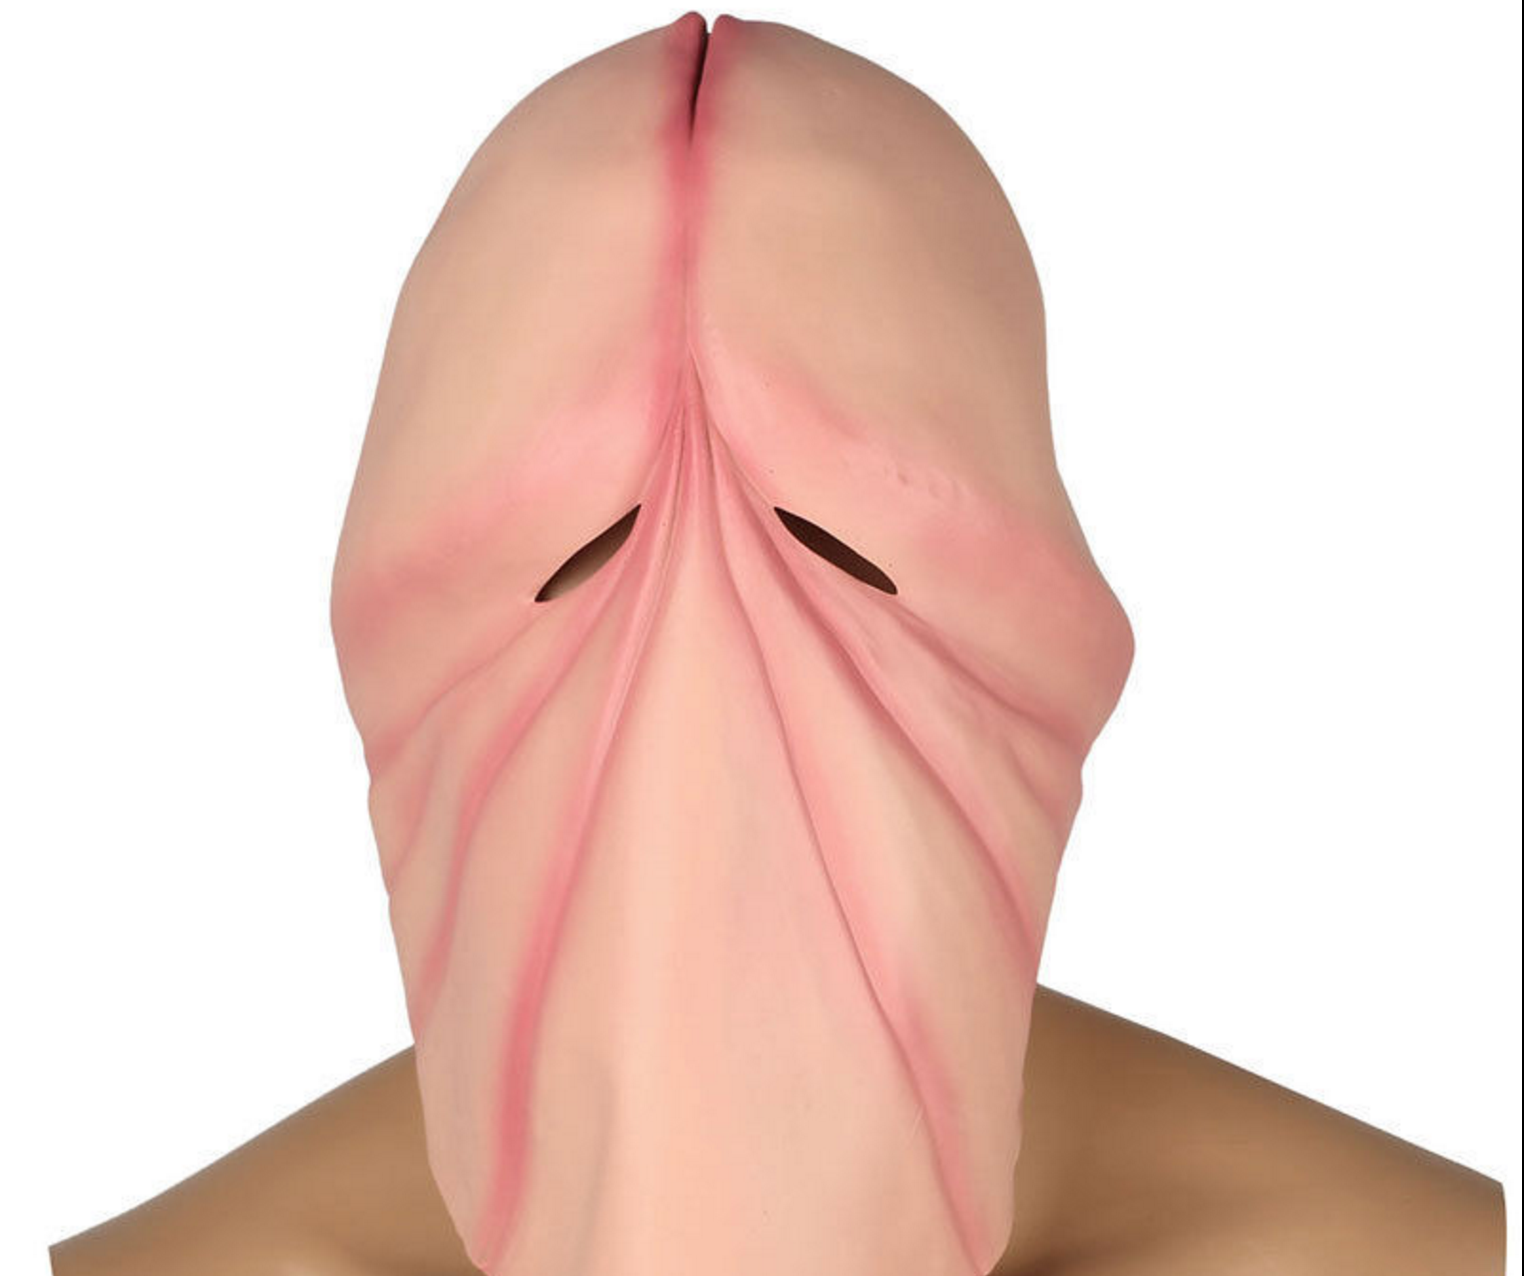 For halloween this year, there is now a penis mask to match the vagina mask